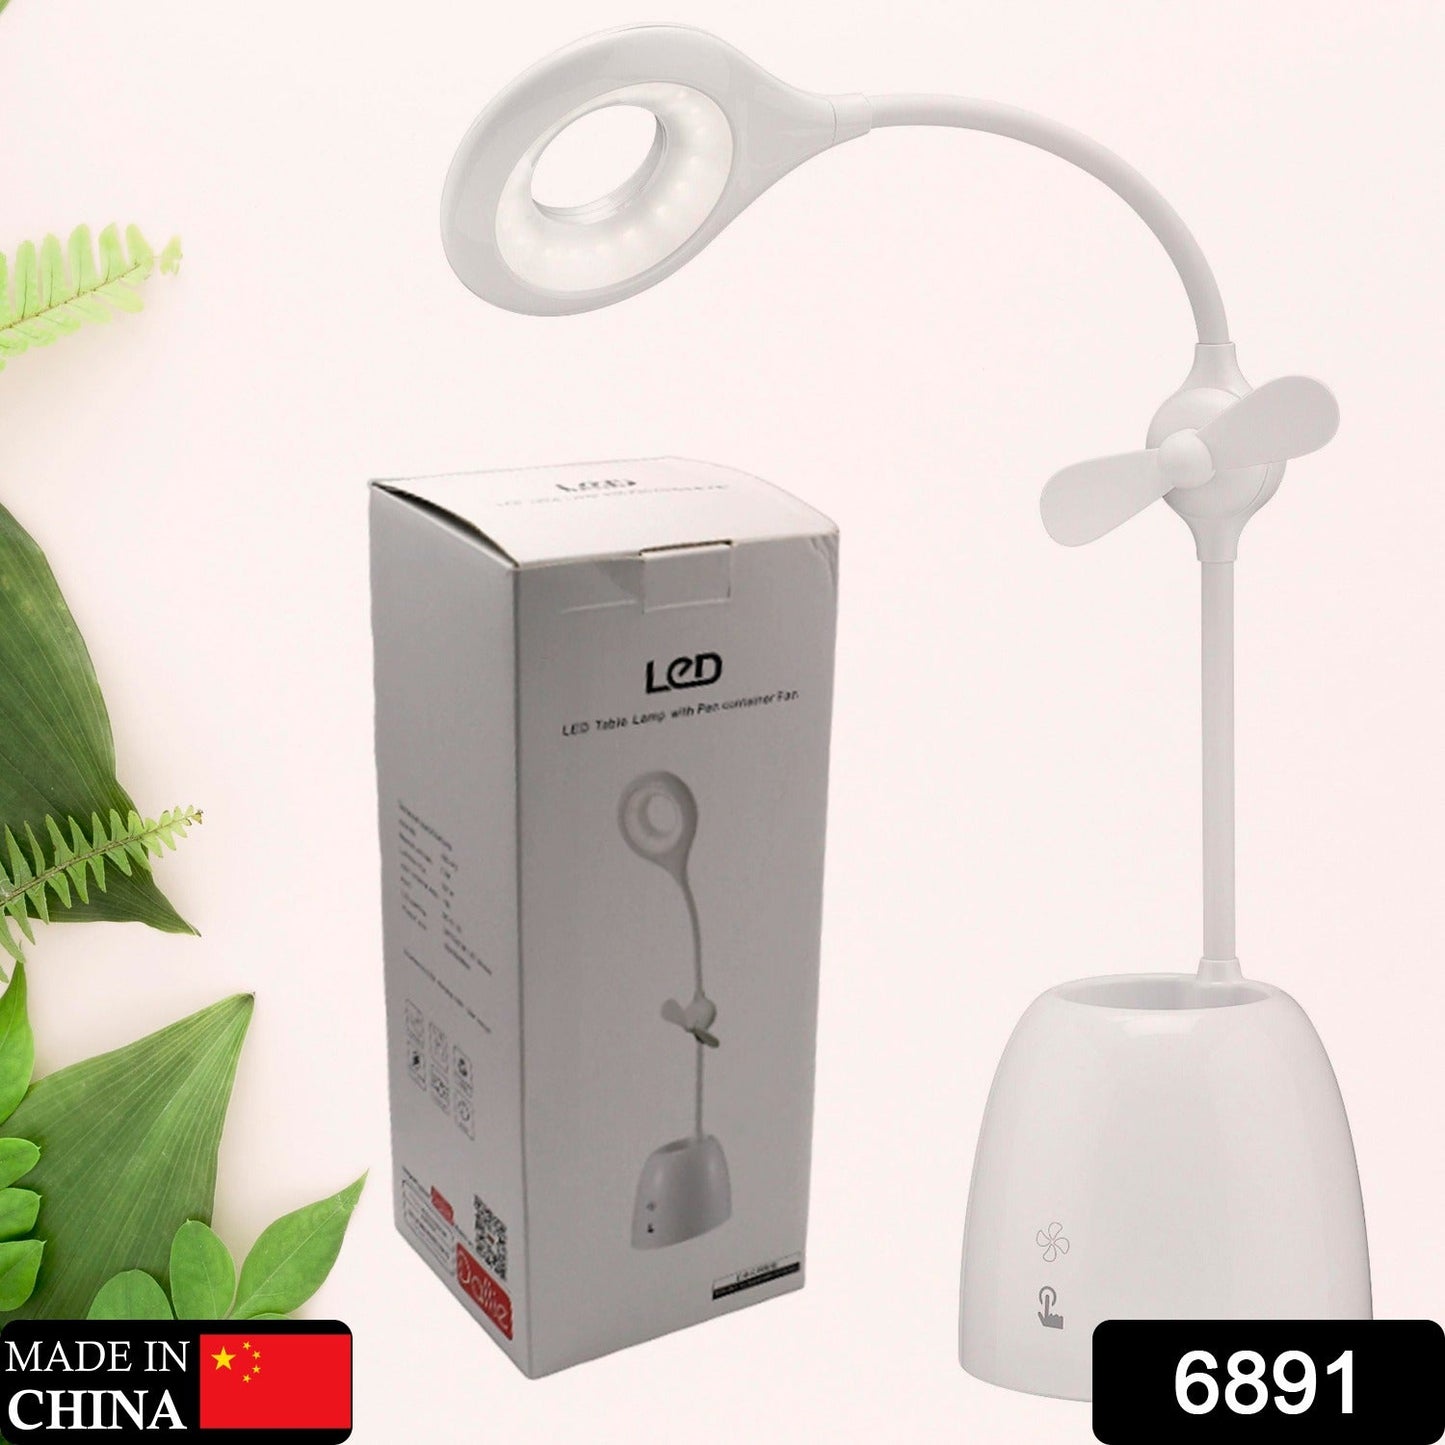 6891 Rechargeable LED, LED Desk Lamp with Pen Container Fan, Interior Lighting for Study, Children's Room, Bedroom or Office, Perfect for Emergency, Study, Reading and Home USB Cable Included